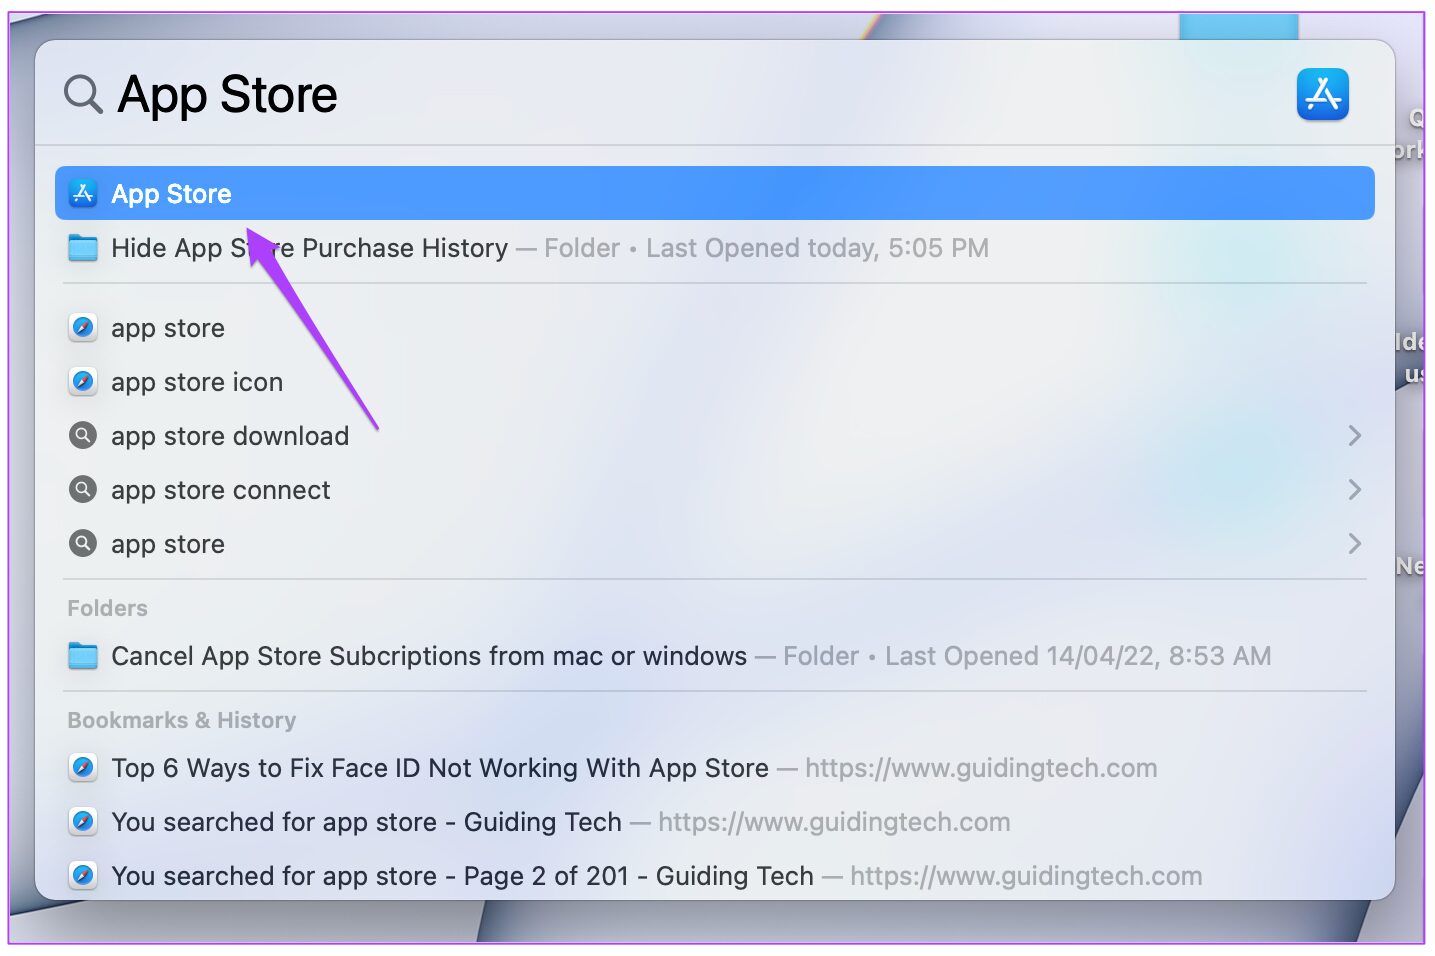 How to hide an  order from your purchase history